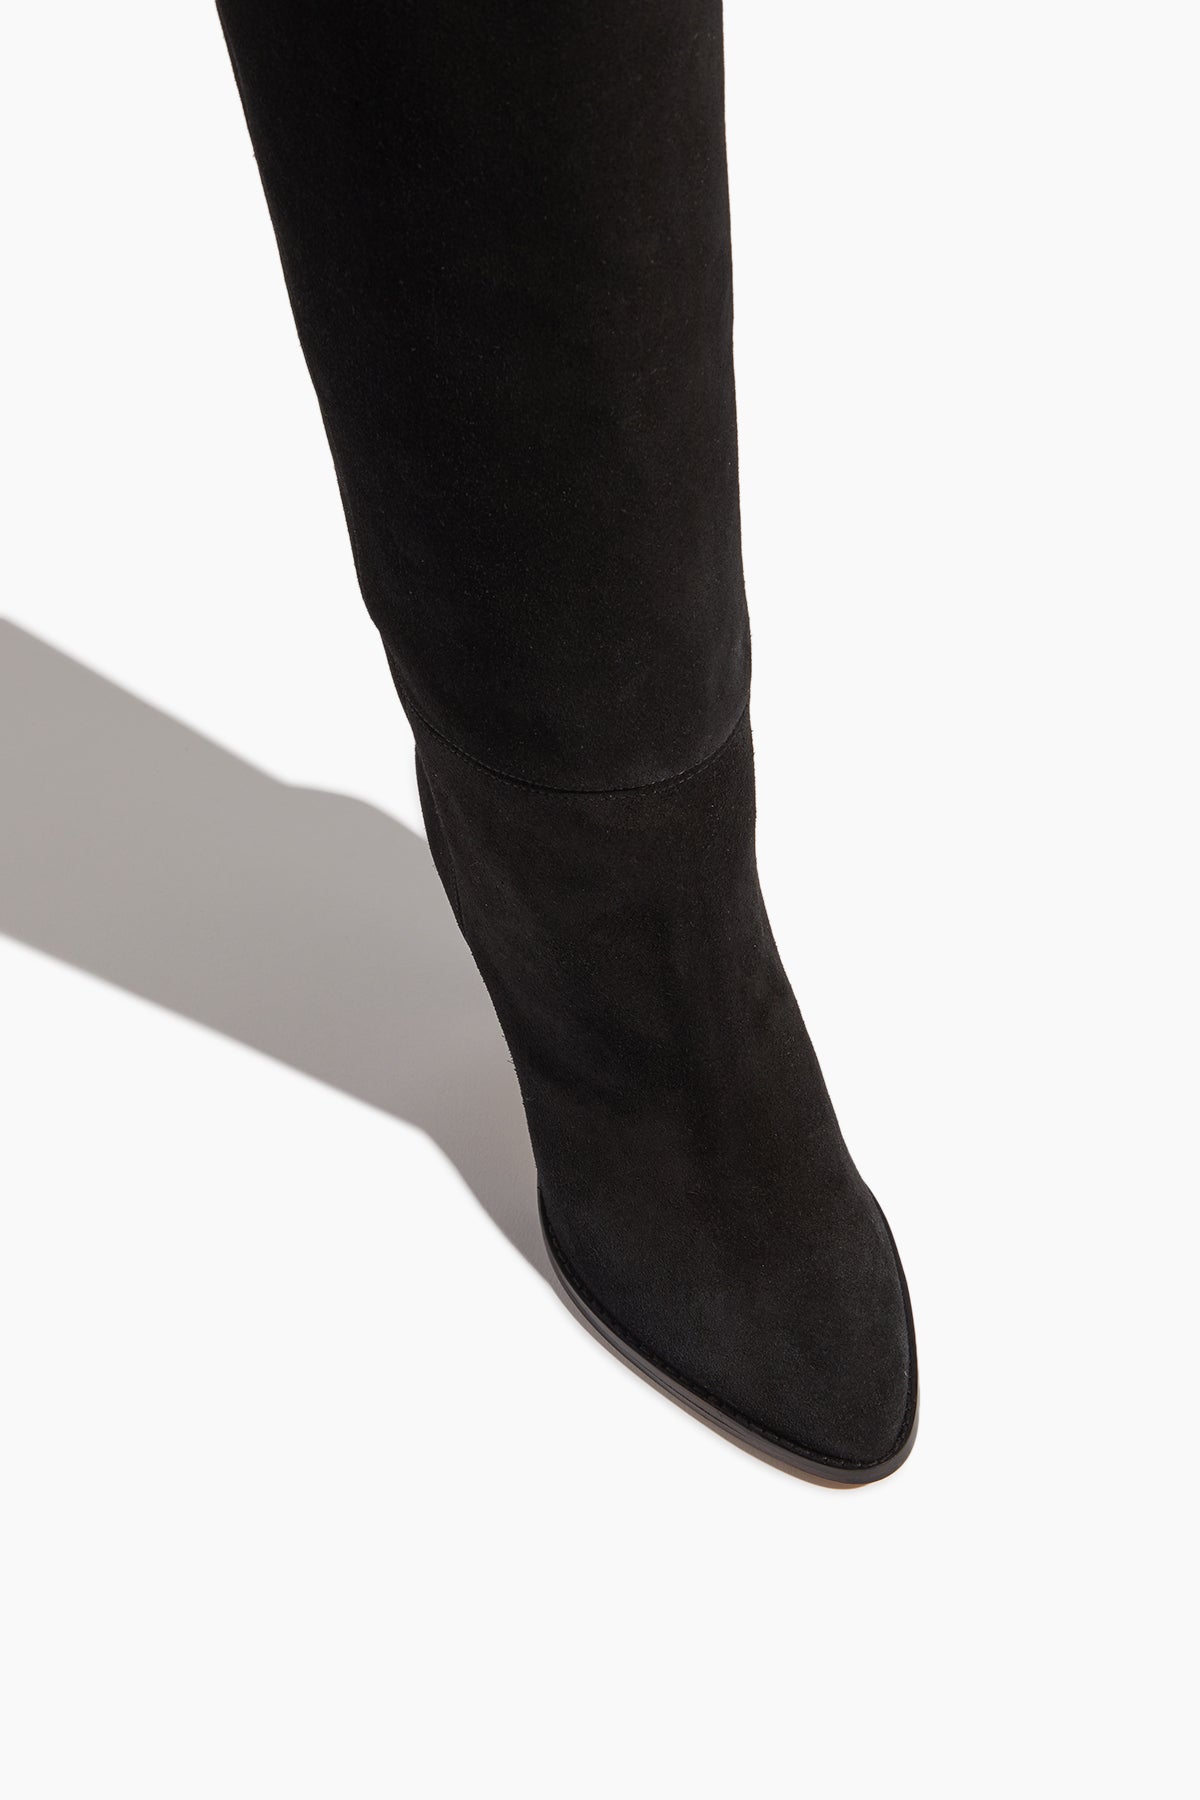 Isabel Marant Shoes Tall Boots Ririo Boot in Black Isabel Marant Ririo Boot in Black